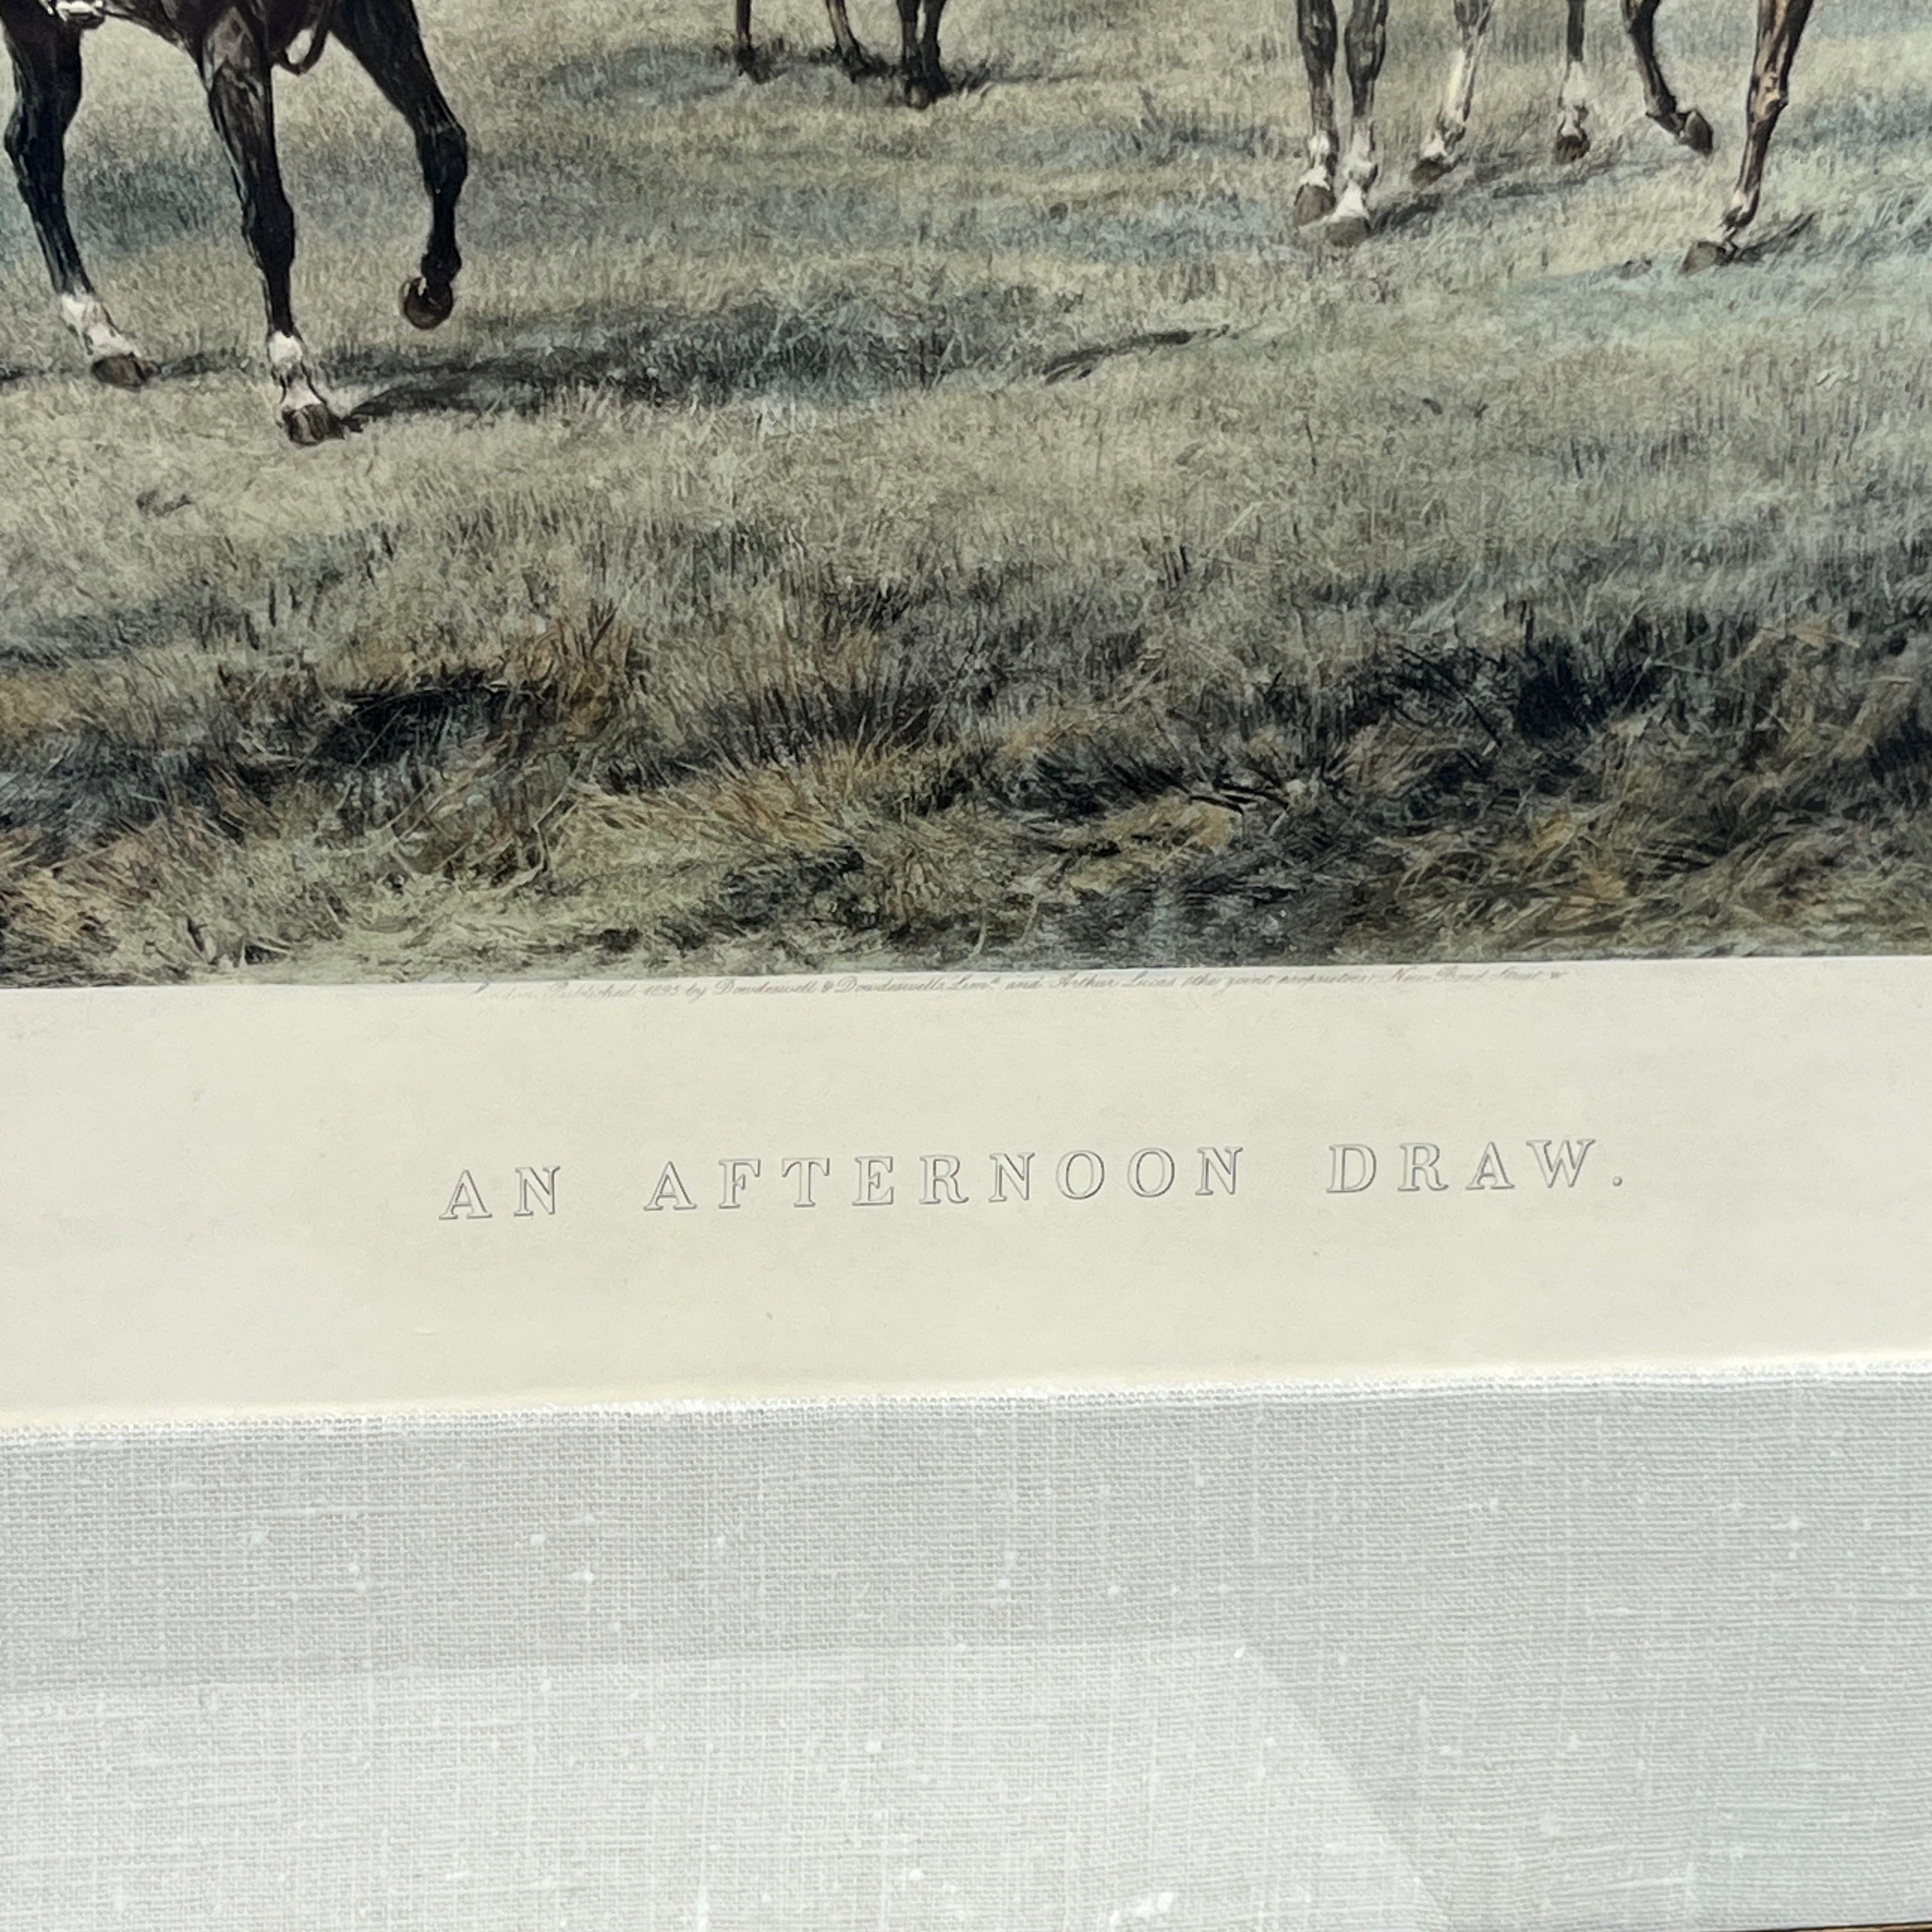 "An Afternoon Draw" by Heywood Harby